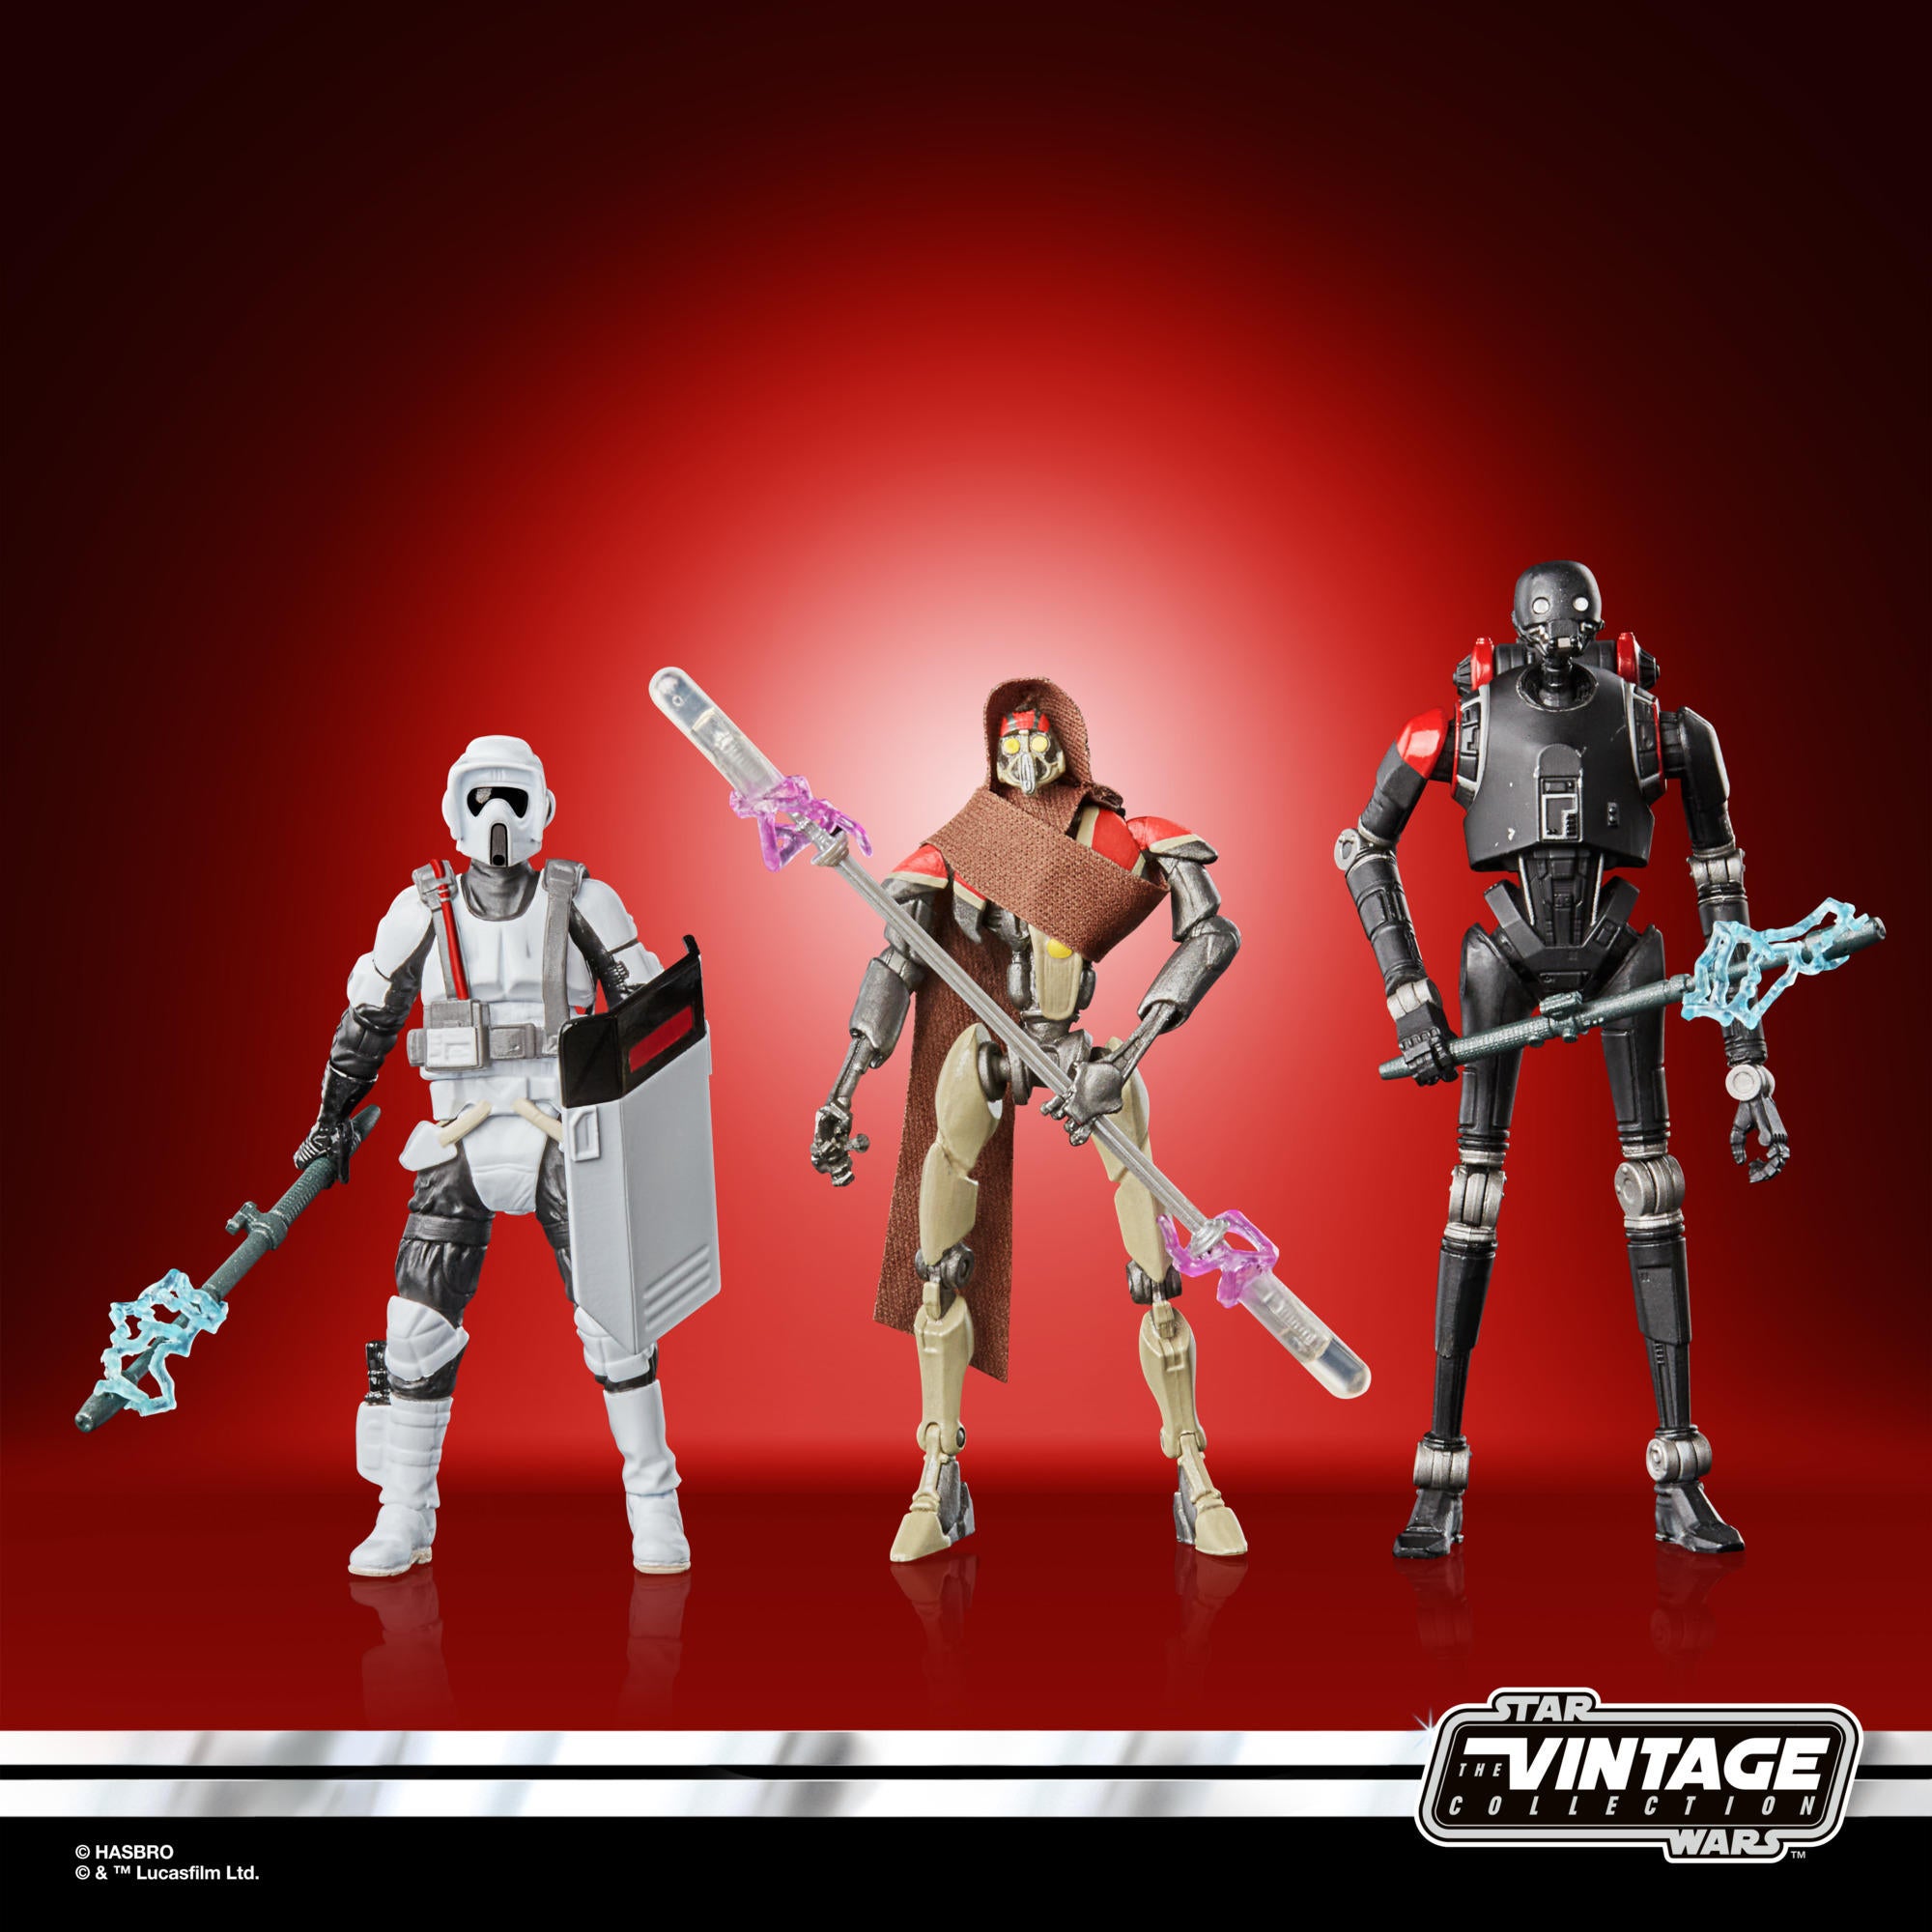 star-wars-the-vintage-collection-3-75-in-gaming-greats-star-wars-jedi-19.jpg